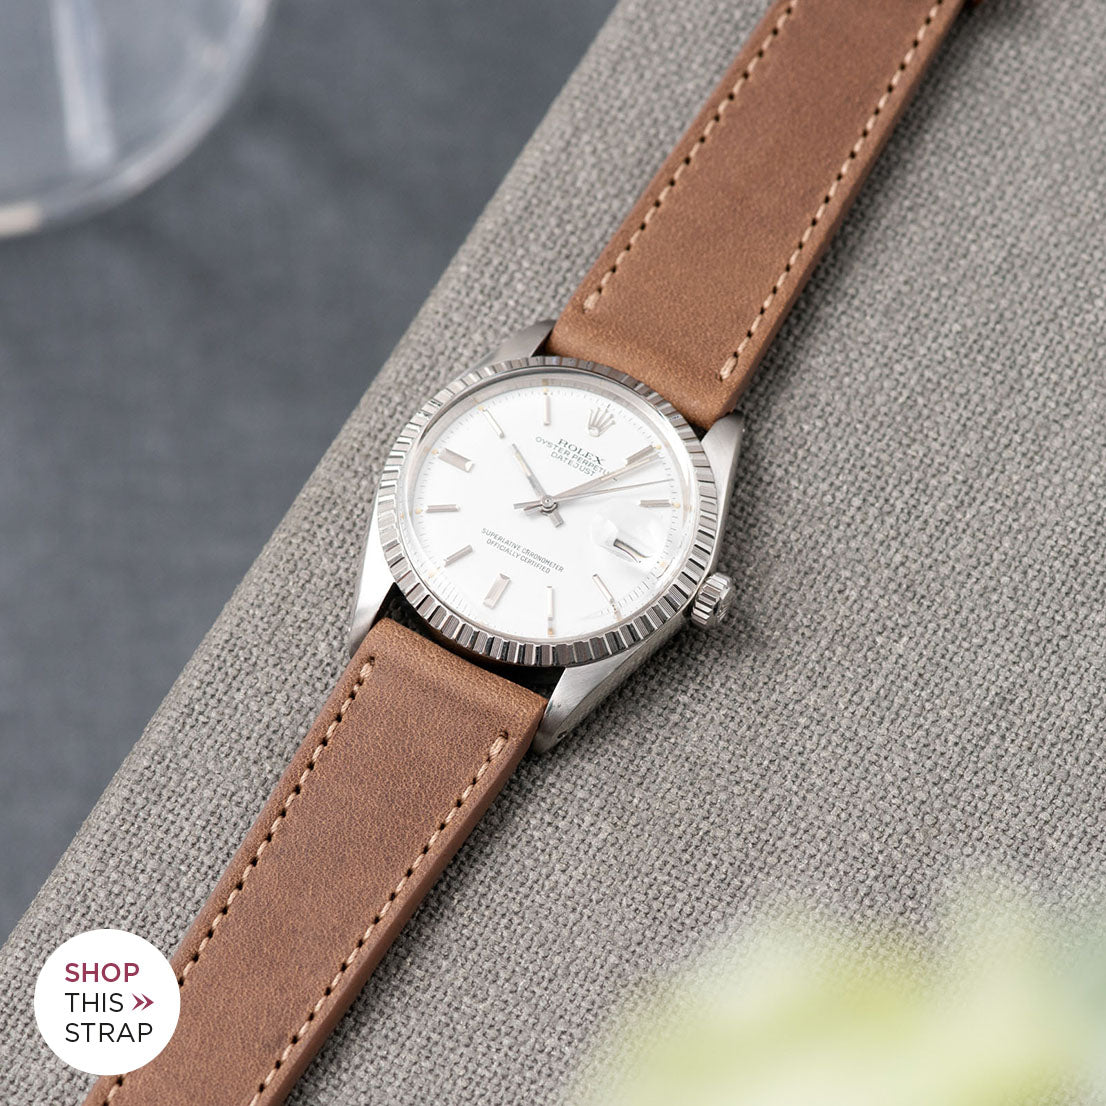 Cinnamon Brown Leather Watch Strap